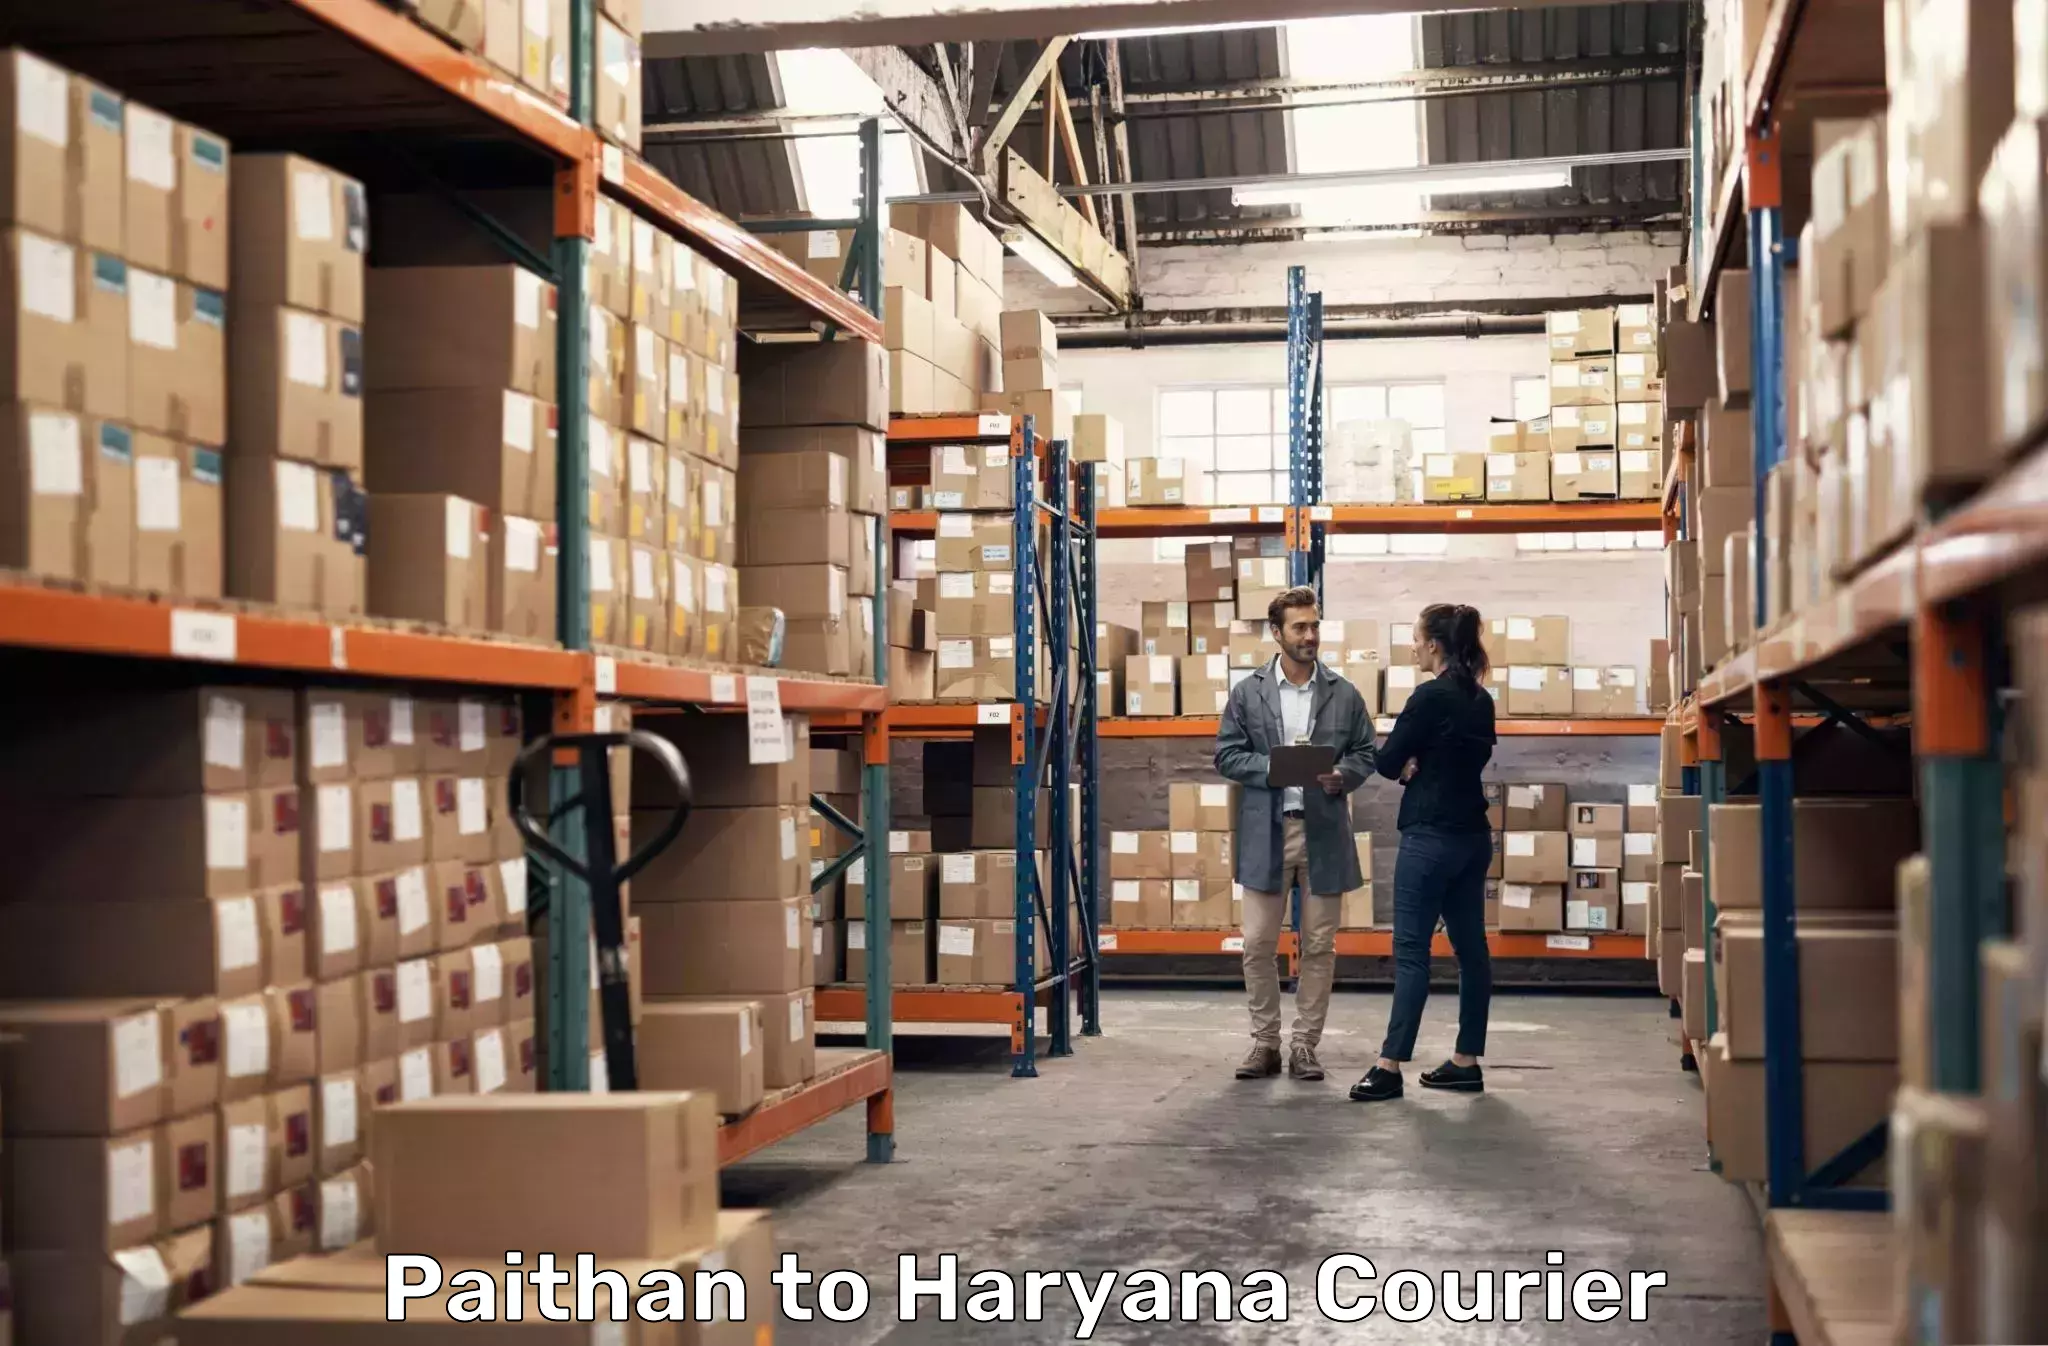 24/7 courier service Paithan to Gurugram